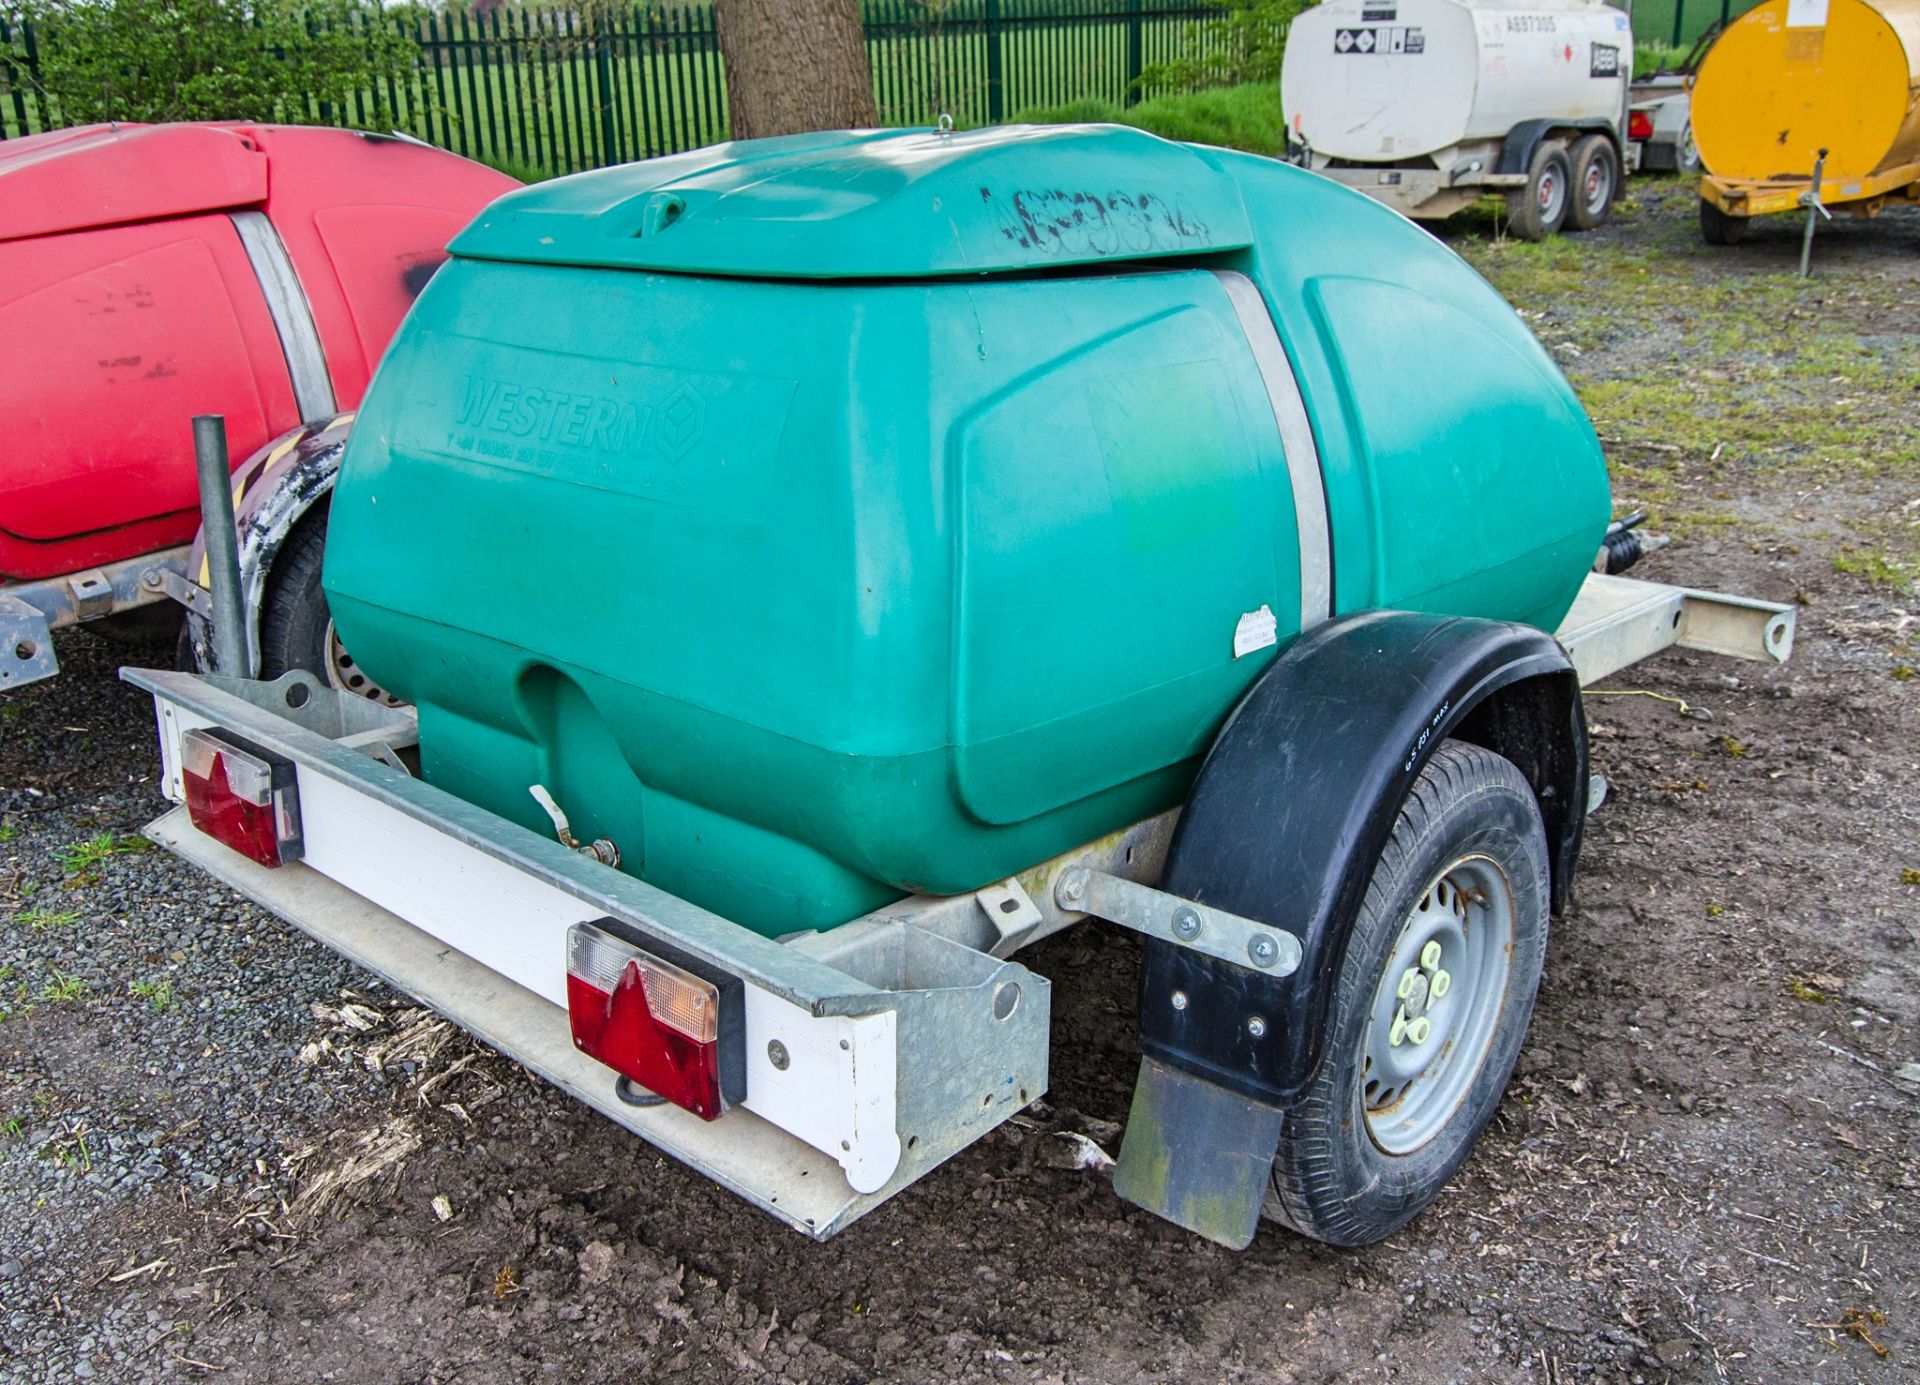 Western 1000 litre fast tow mobile water bowser A699304 - Image 3 of 6